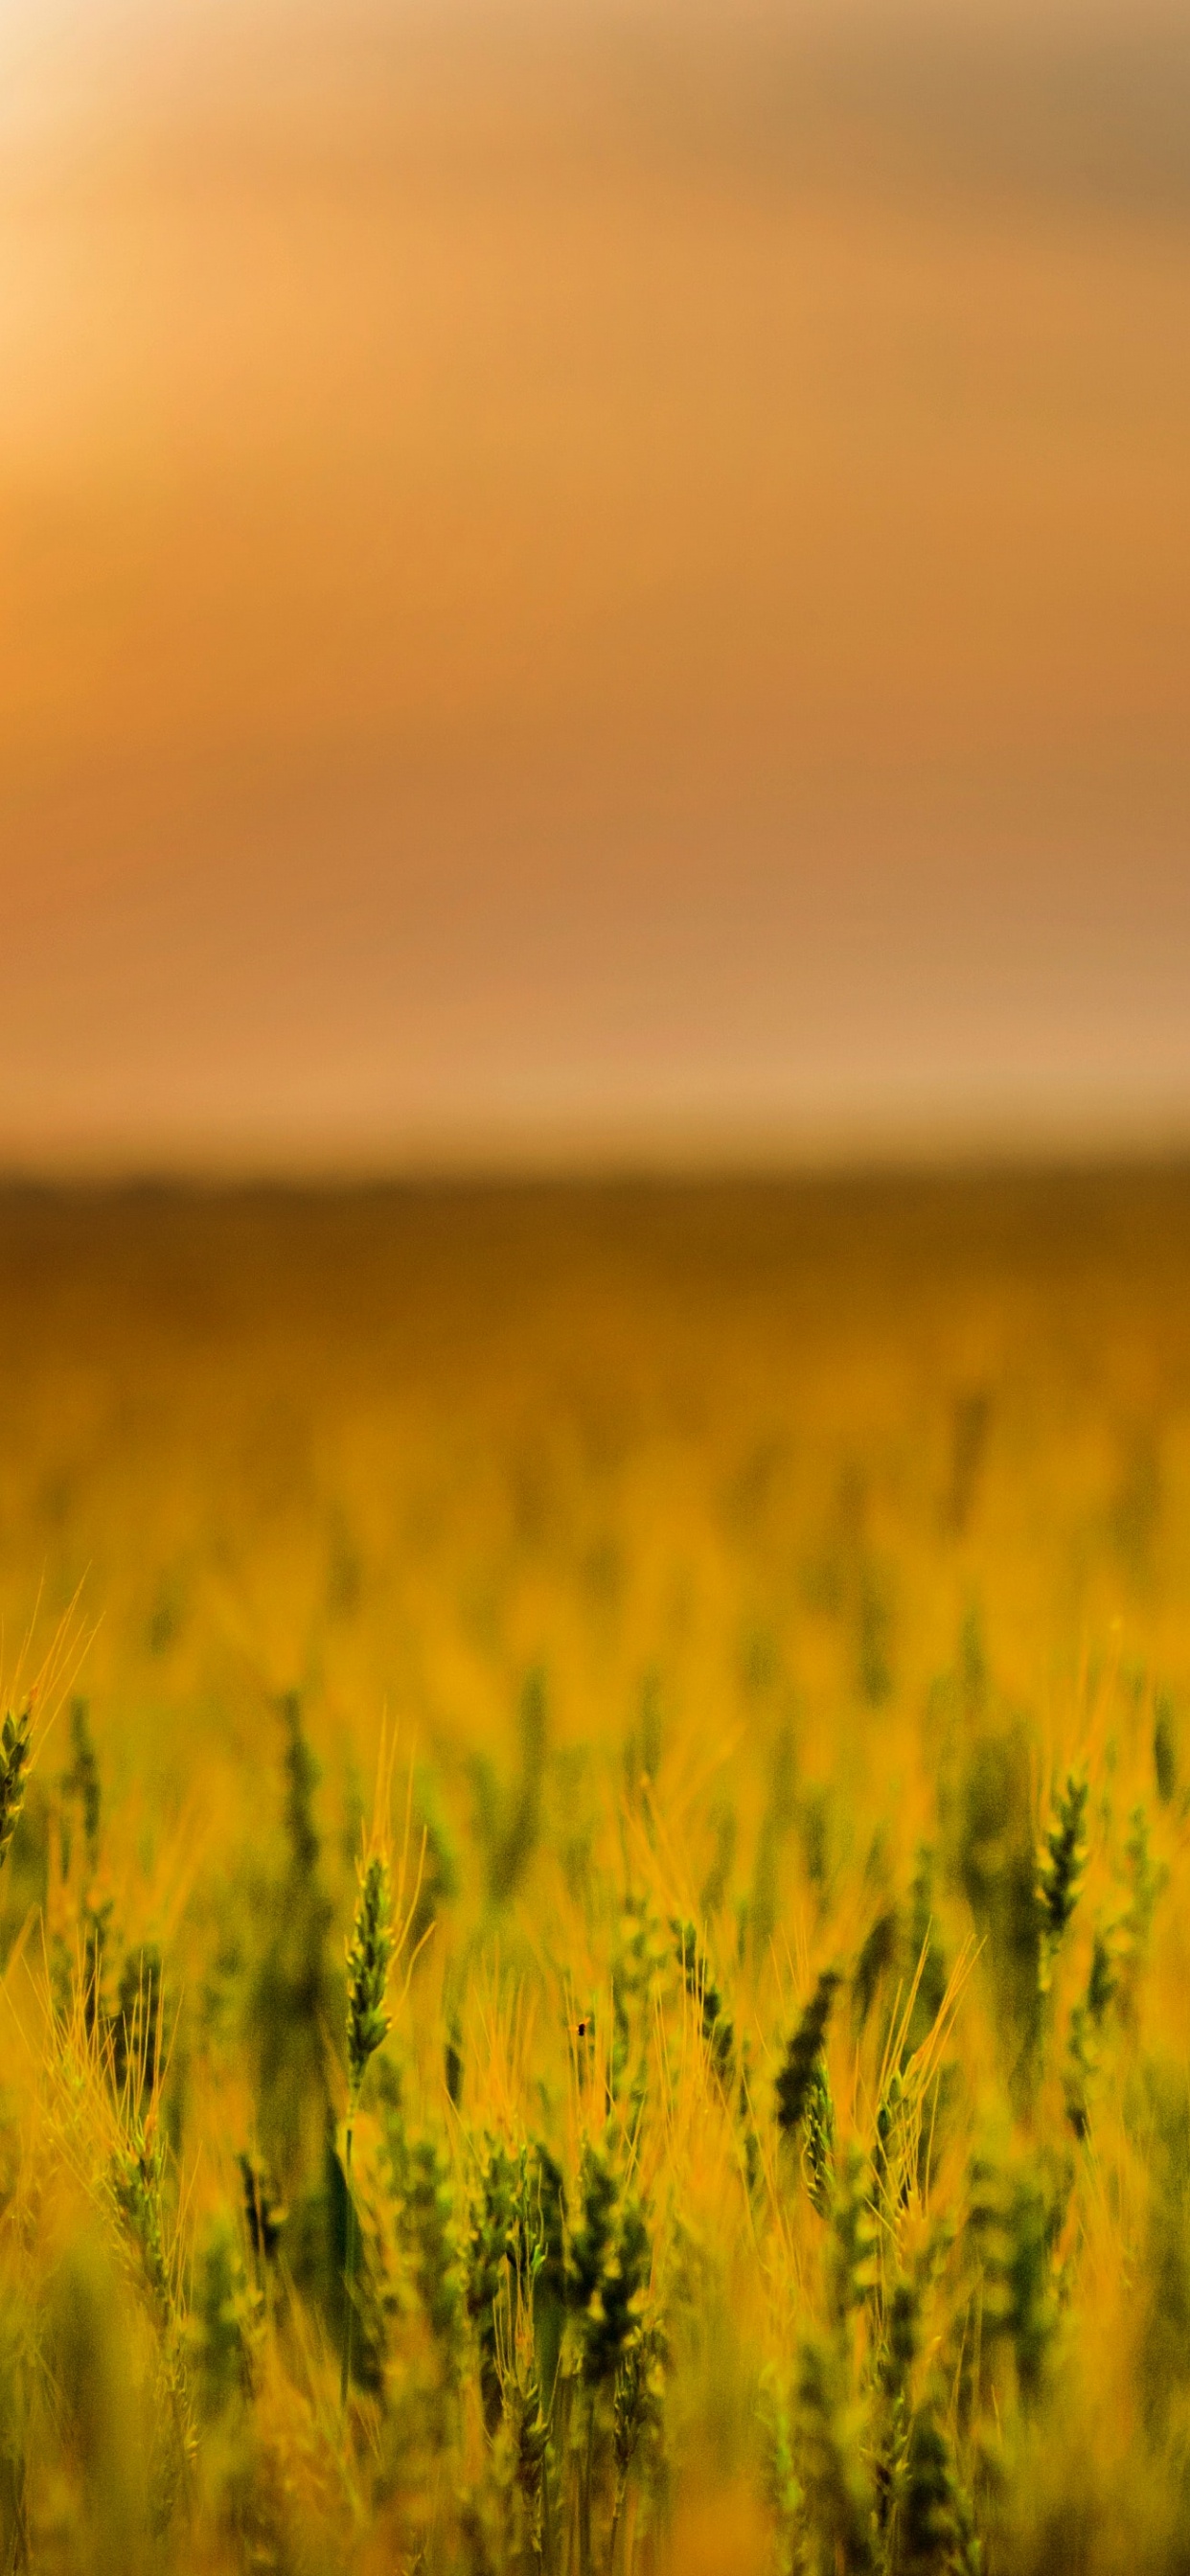 Agriculture, Field, Farm, Cereal, People in Nature. Wallpaper in 1242x2688 Resolution